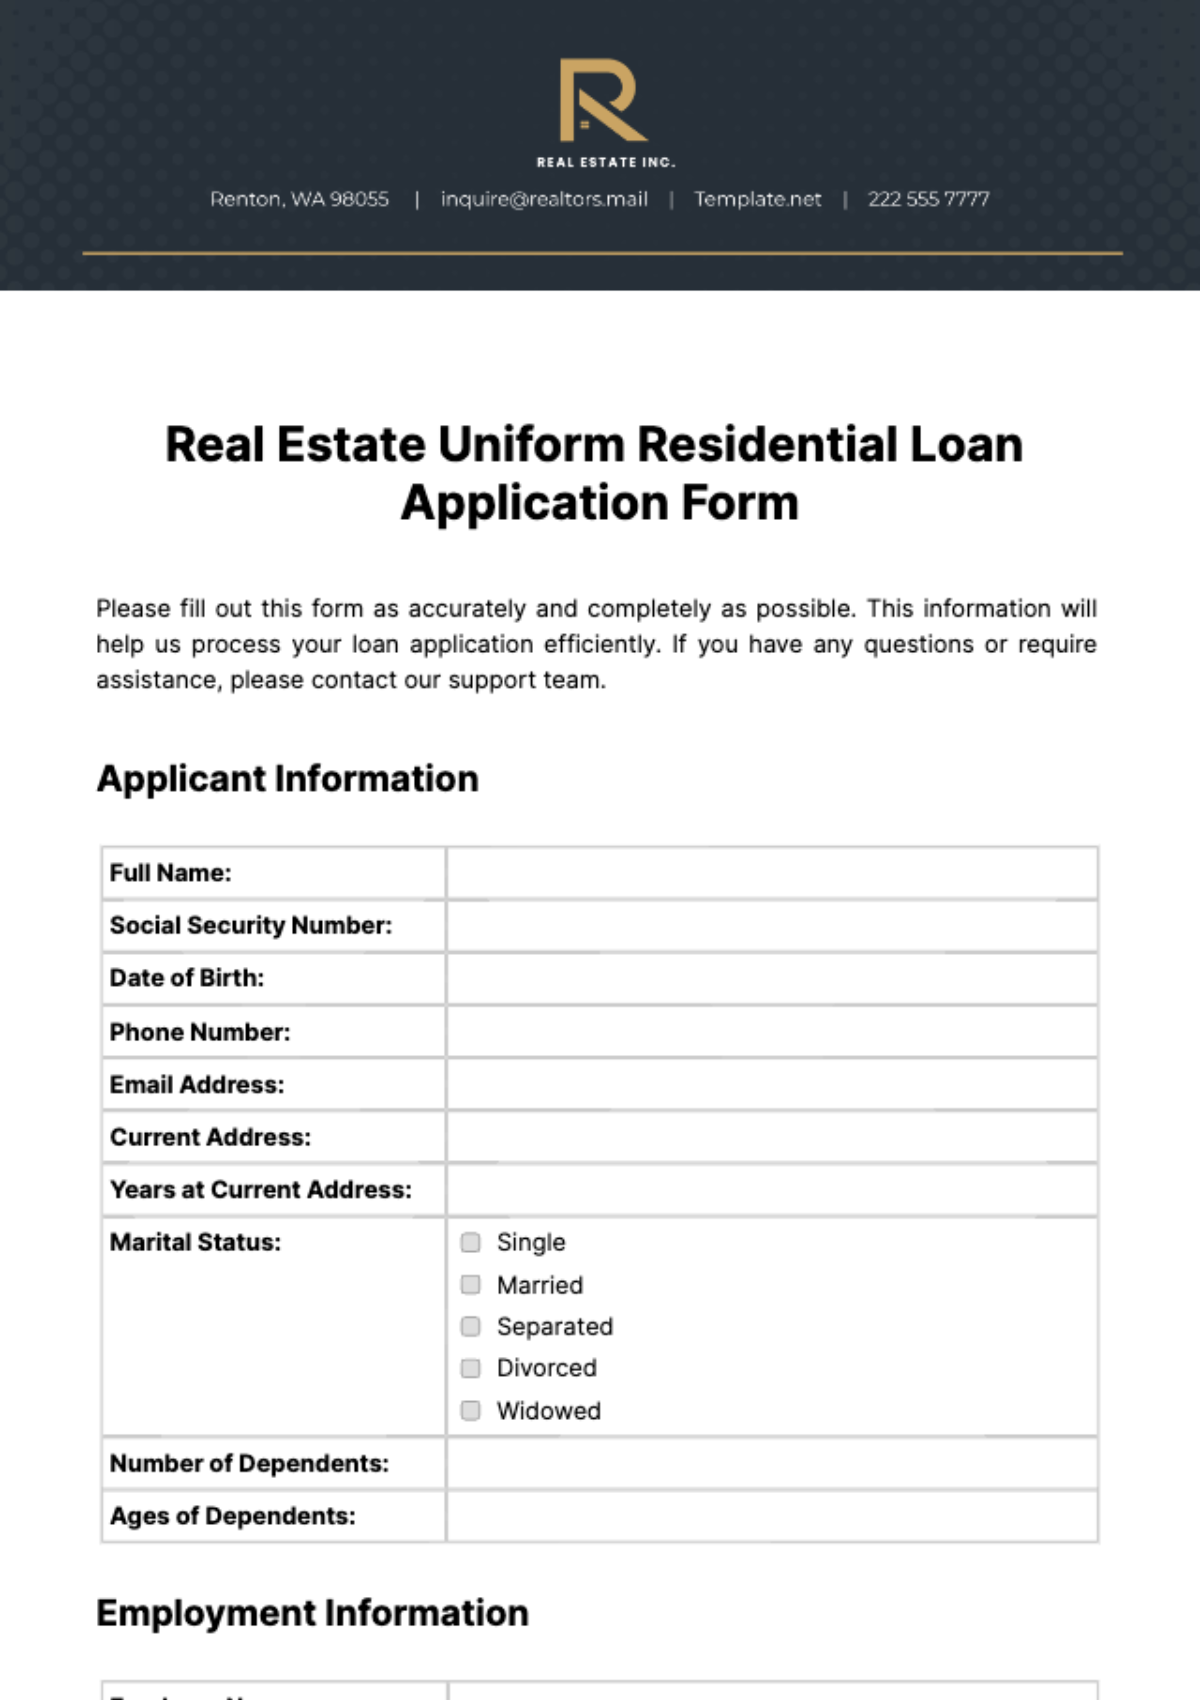 Real Estate Uniform Residential Loan Application Form Template